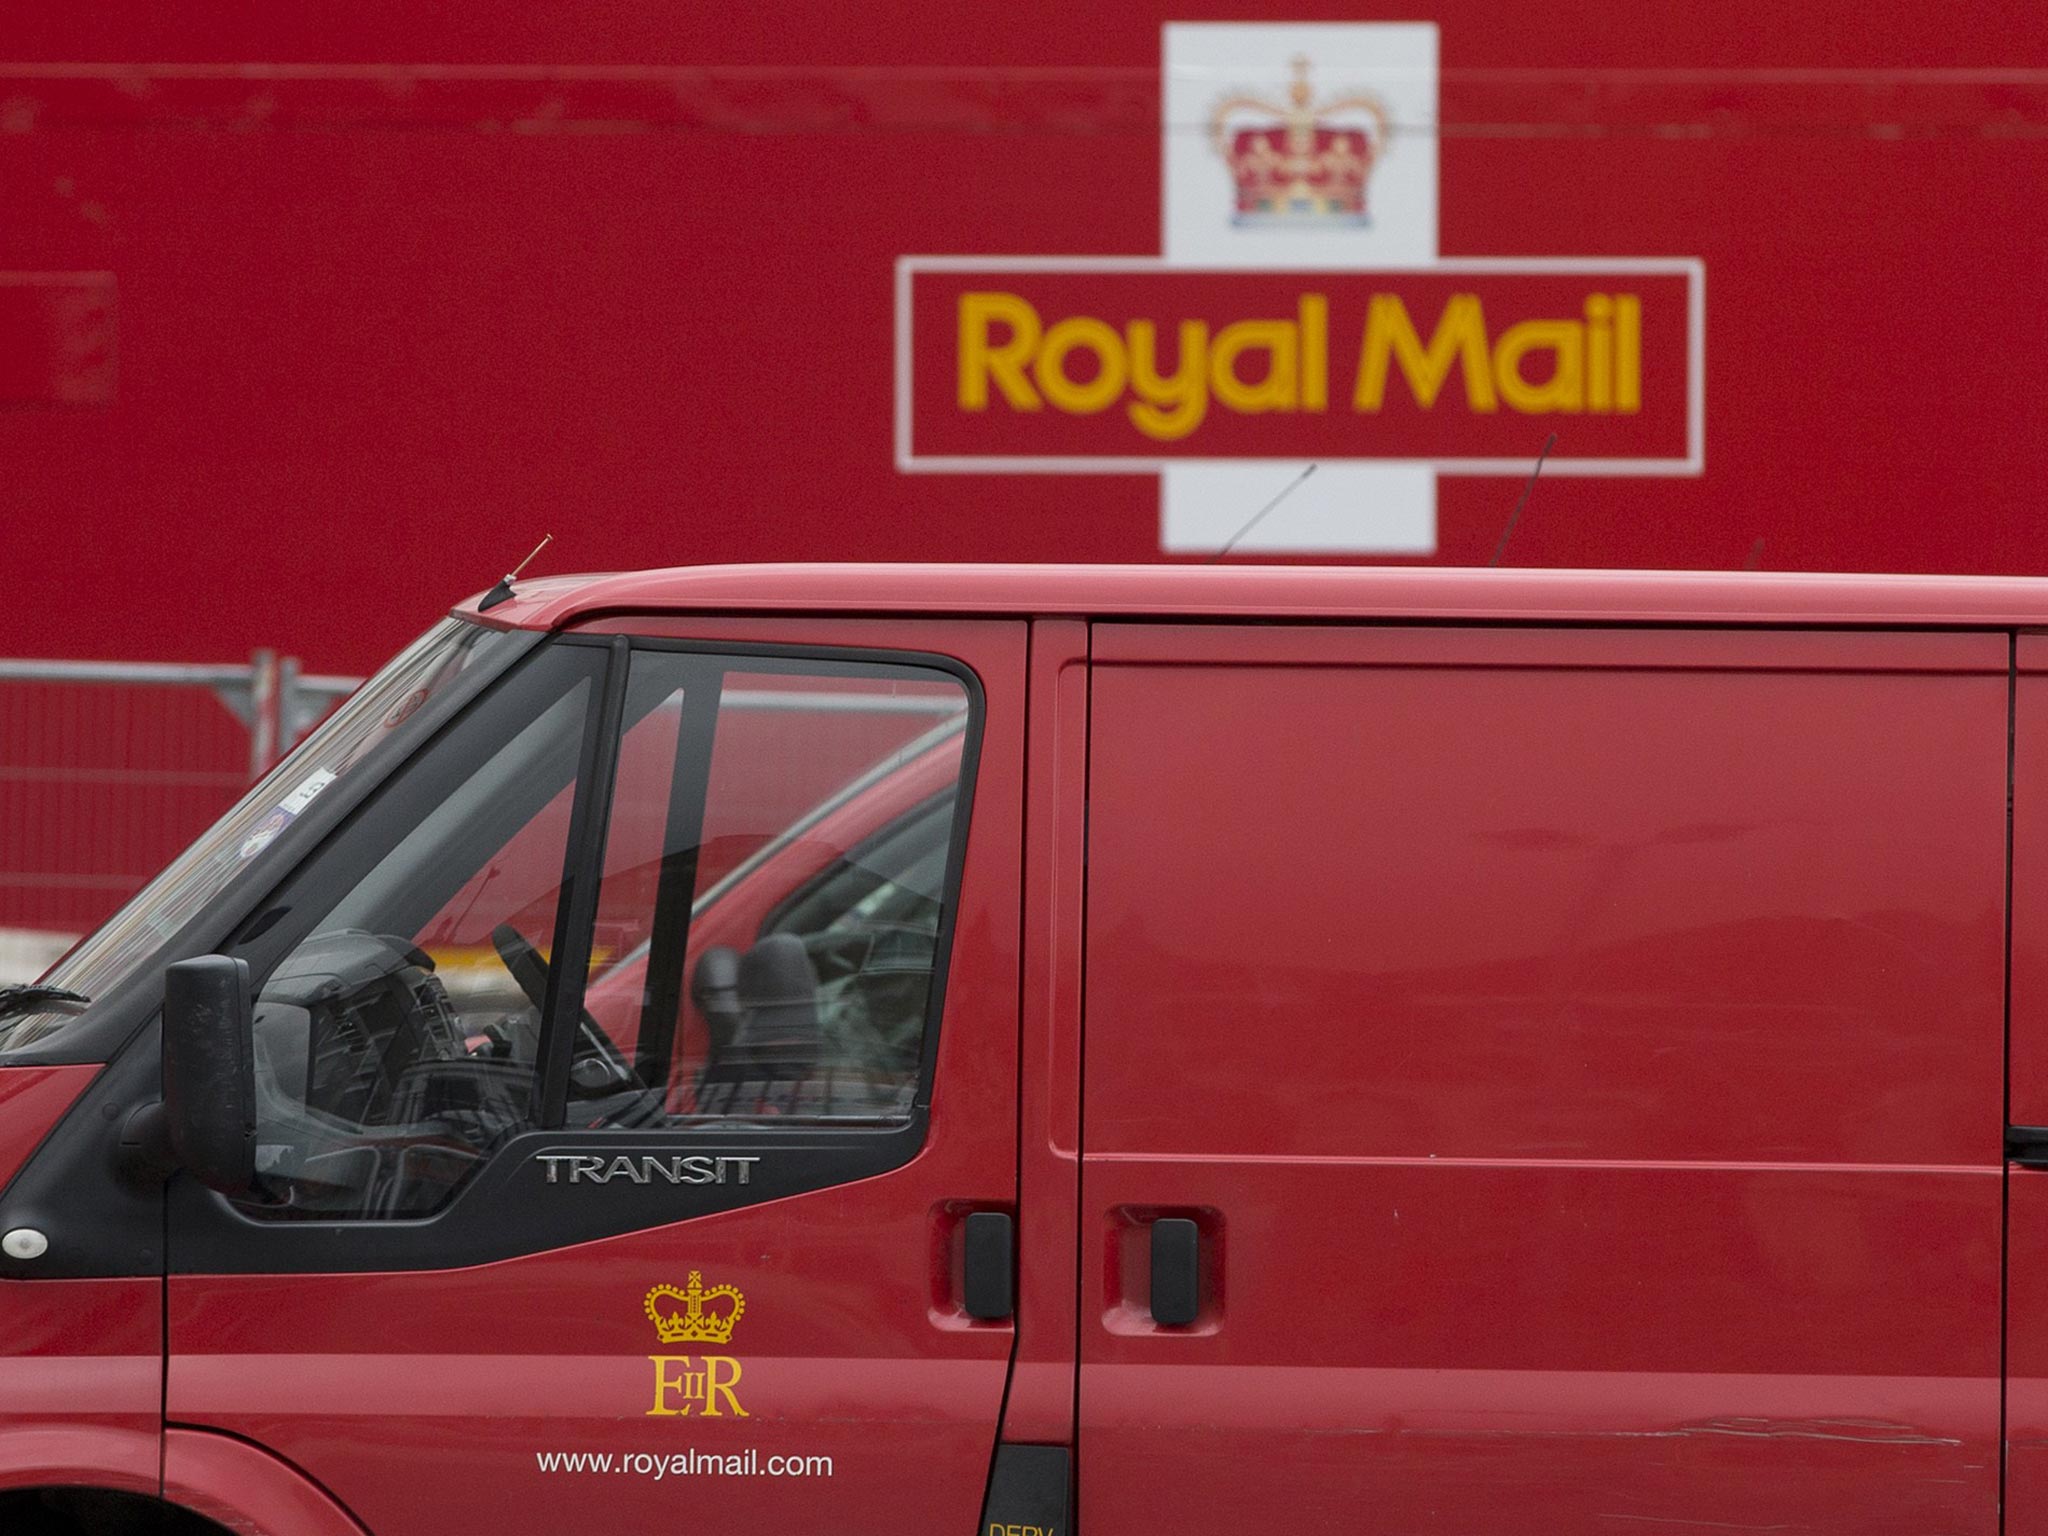 City institutions bidding less than the top price of 330p for Royal Mail shares look set to miss out